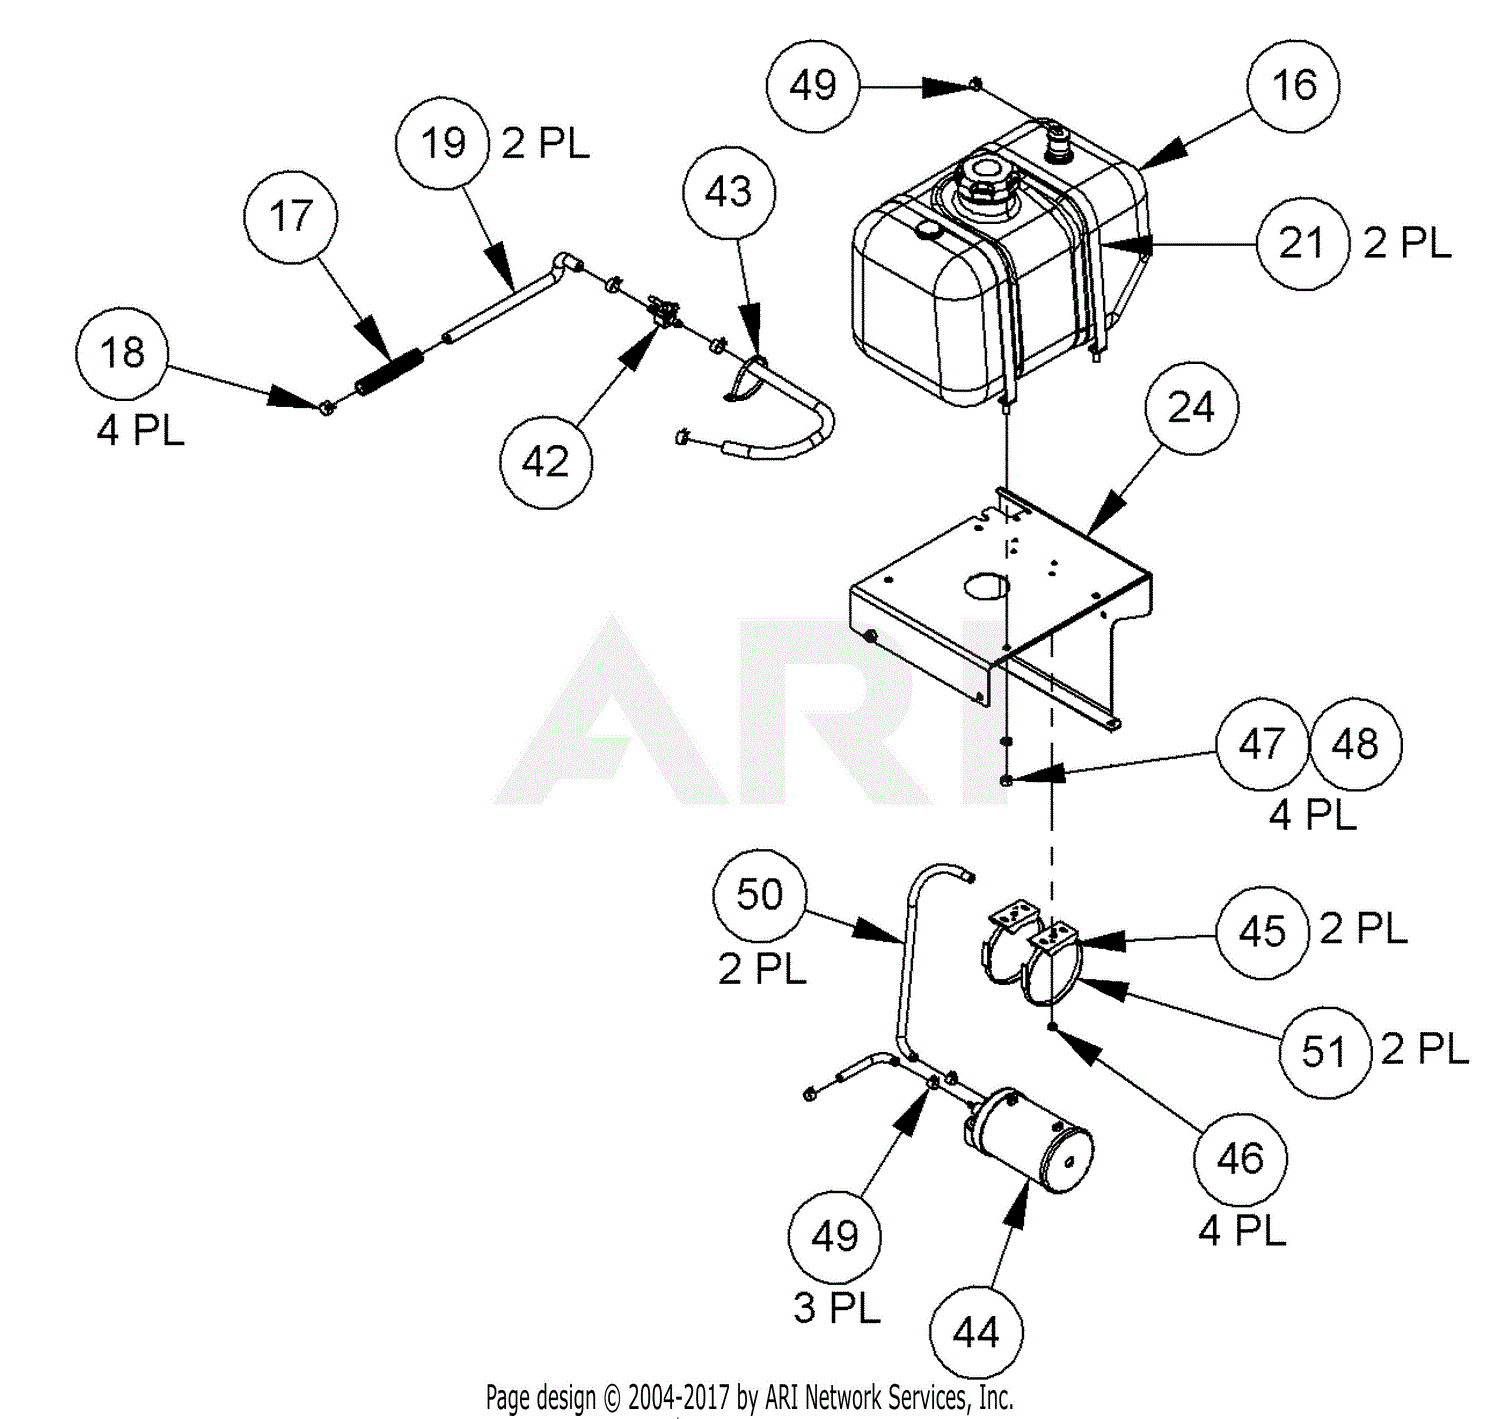 DR Power AT3-Walk Behind Mower (Ser# ATM87418 To ATM137008) Parts Diagrams